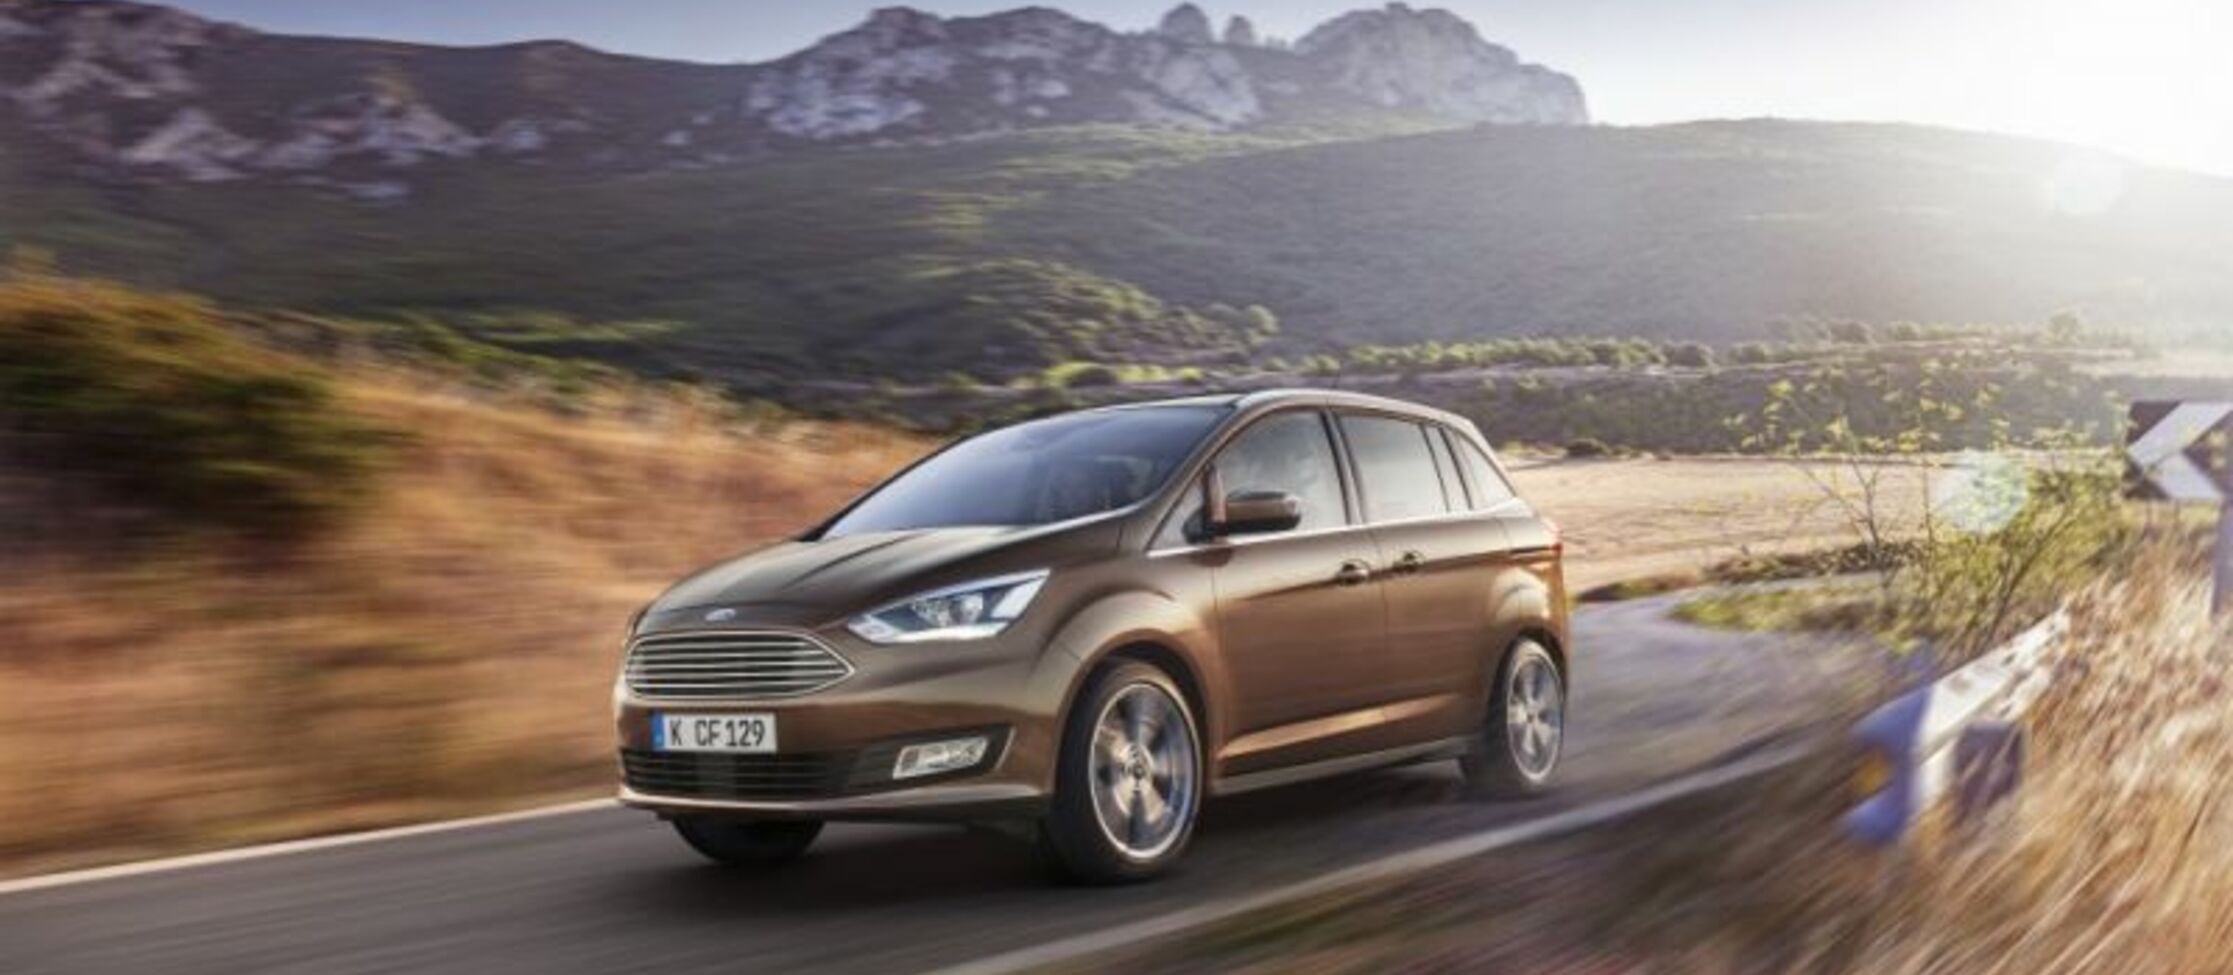 Ford Grand C-MAX (facelift 2015) 1.5 TDCi (95 Hp) S&S 7 Seat 2015, 2016, 2017, 2018, 2019, 2020, 2021